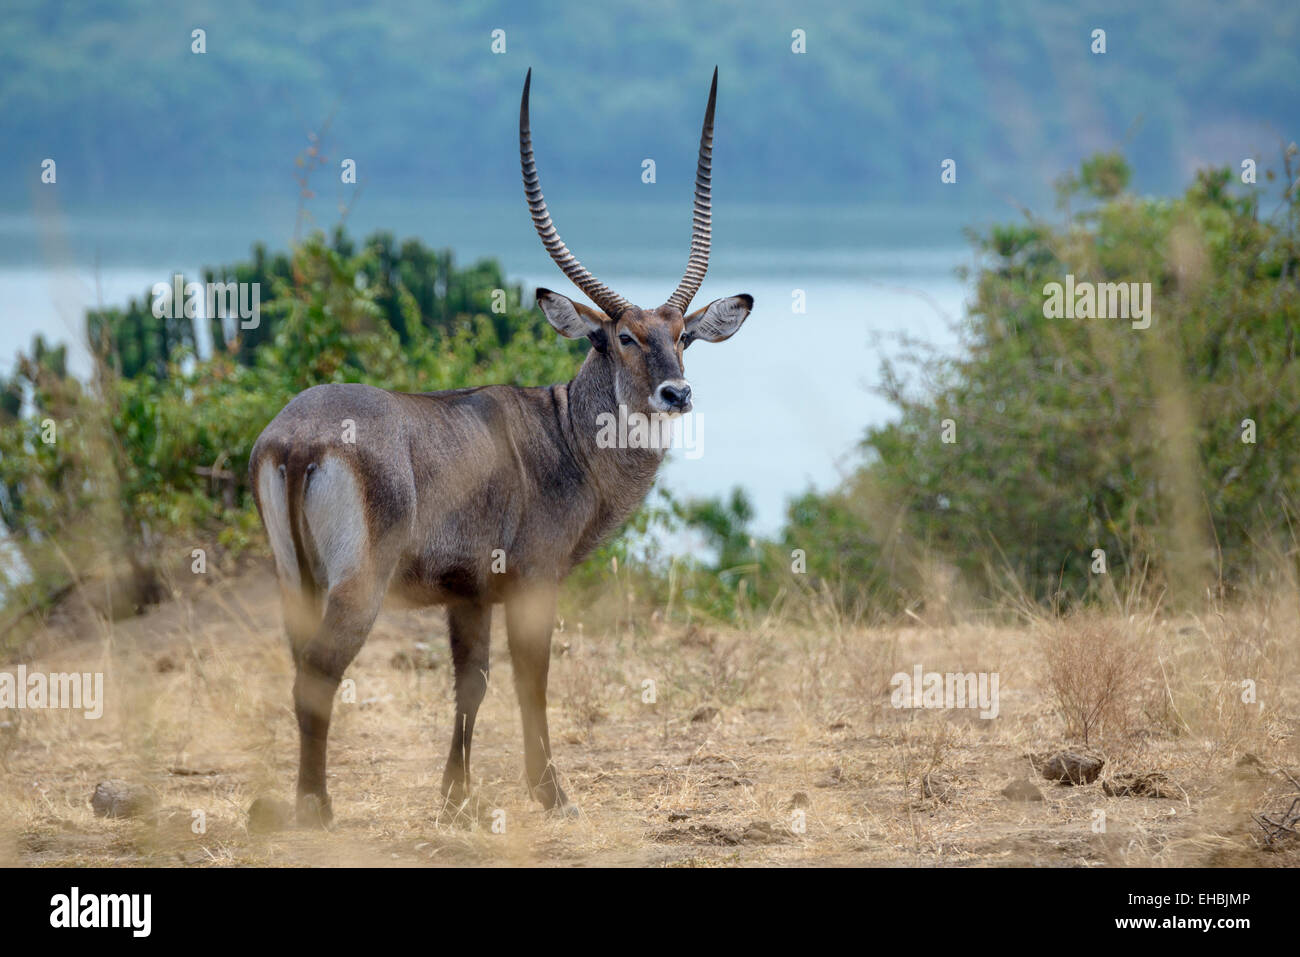 Lone a Defassa waterbuck warily looks about African savanna with a lake in the background. Horizontal format with copyspace. Stock Photo